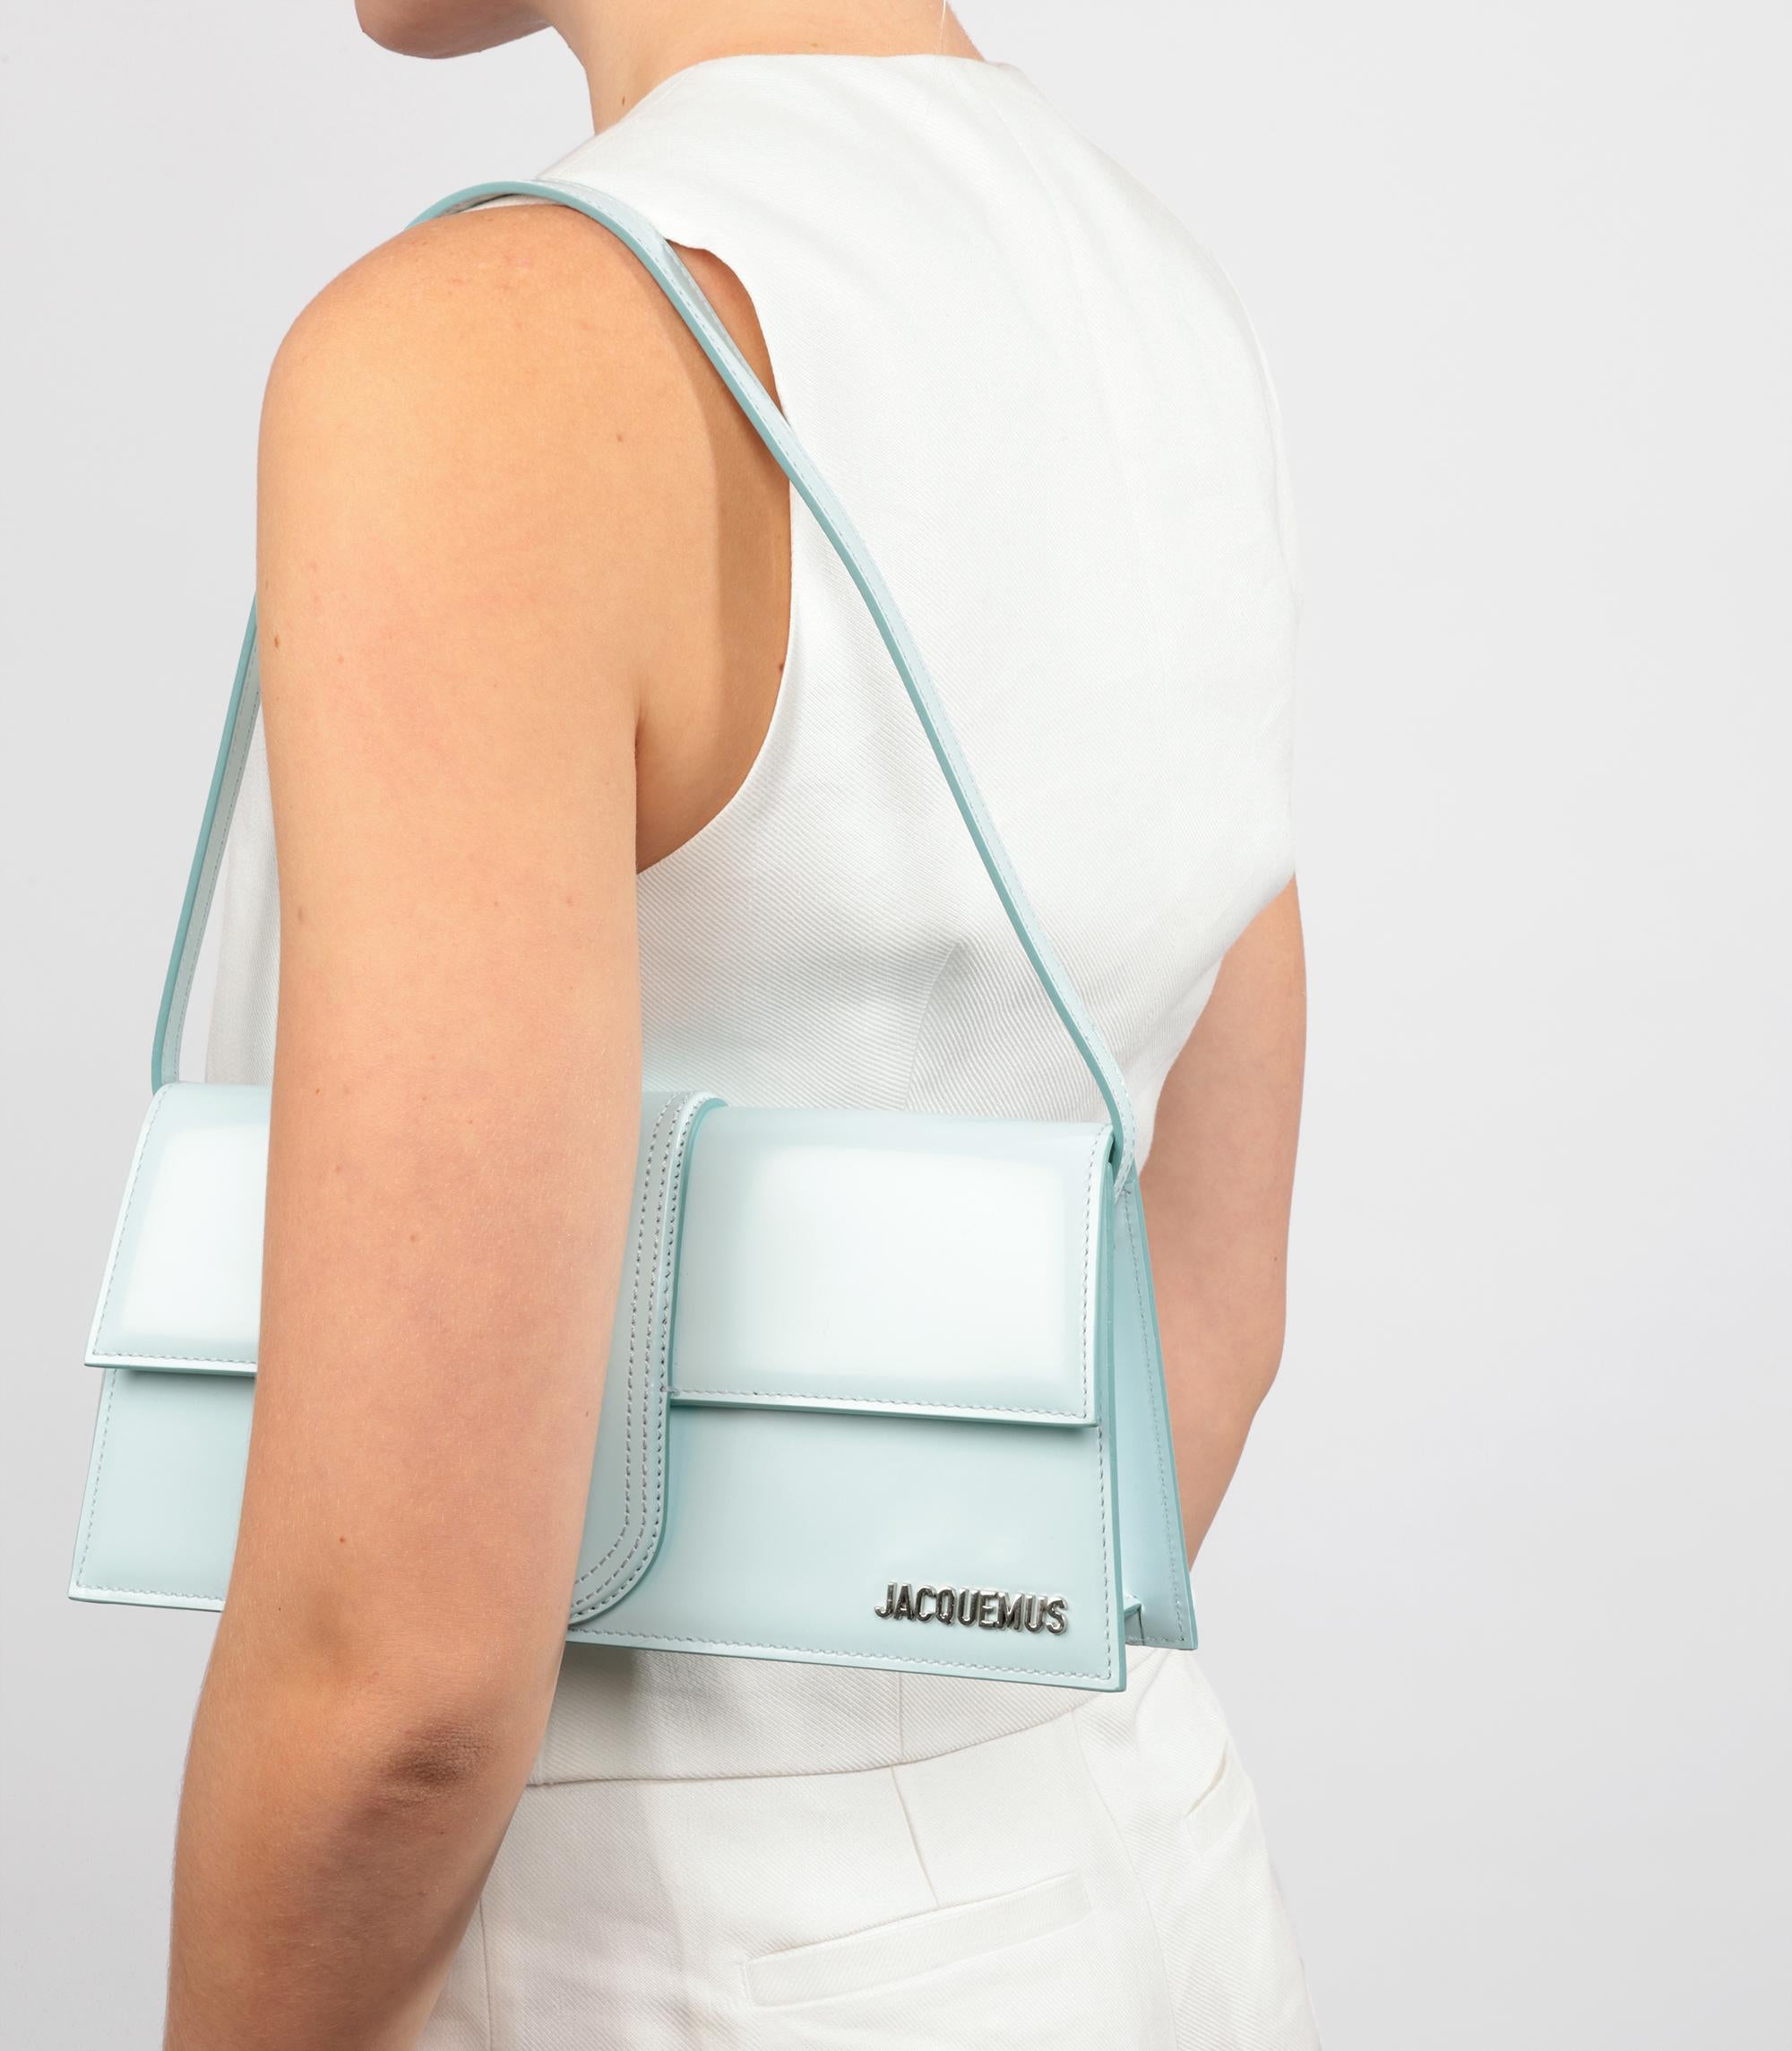 Jacquemus Light Blue Patent Leather Le Bambino Long

Brand- Jacquemus
Model- Le Bambino Long
Product Type- Shoulder, Top Handle
Age- Circa 2023
Accompanied By- Jacquemus Dust Bag
Colour- Light Blue
Hardware- Silver
Material(s)- Patent